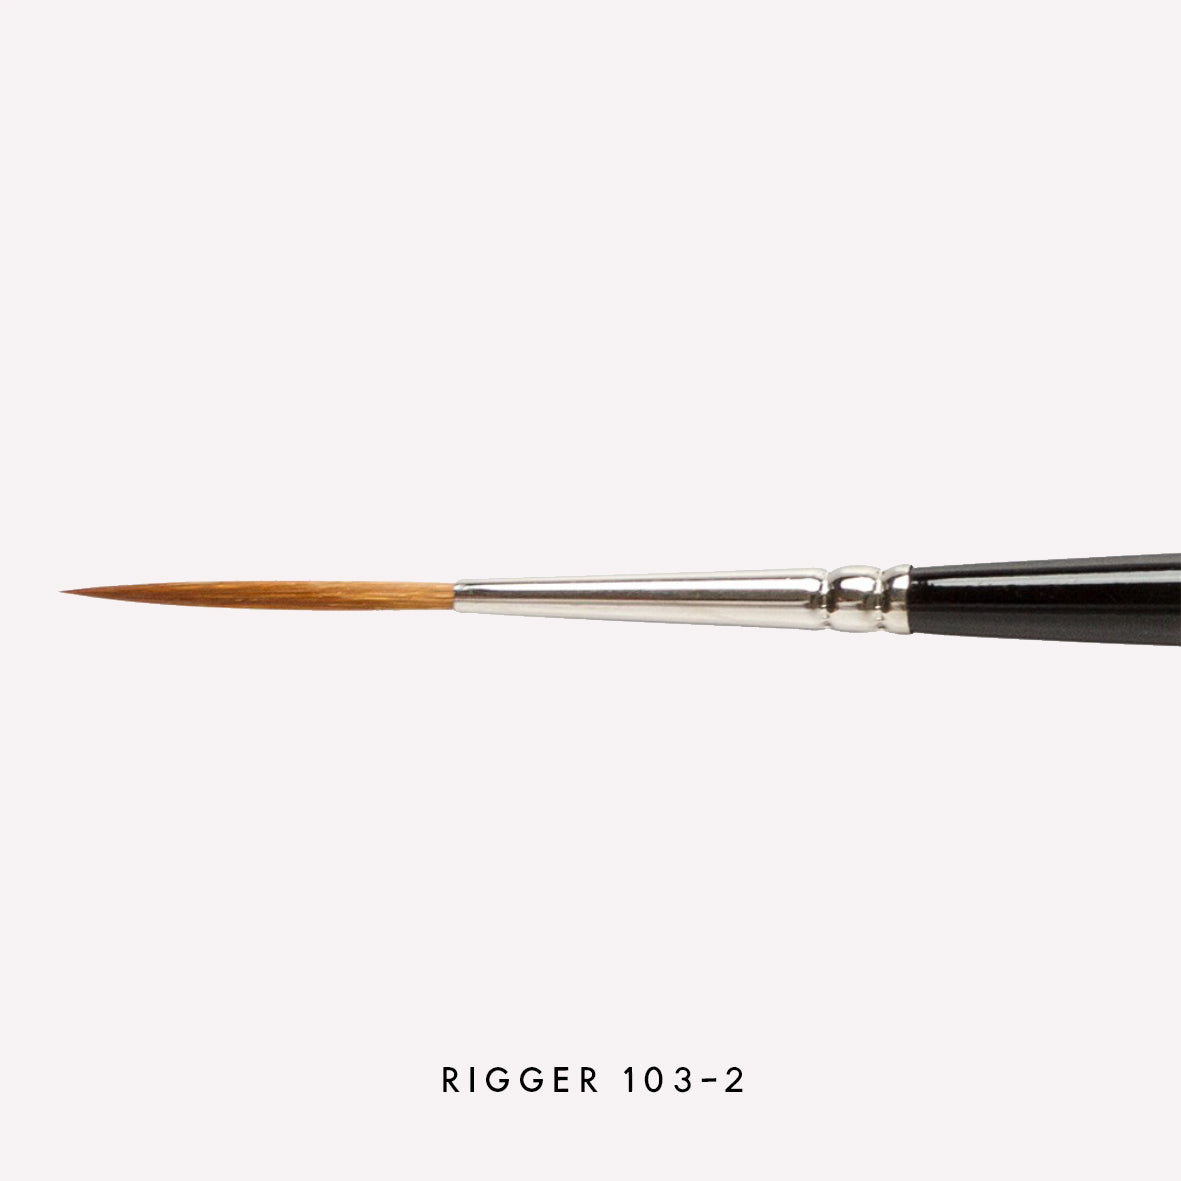 Pro Arte’s Prolene rigger  paintbrush in size 103-2 . Brushes have long synthetic bristles, an ergonomic  black handle and a silver ferrule. 